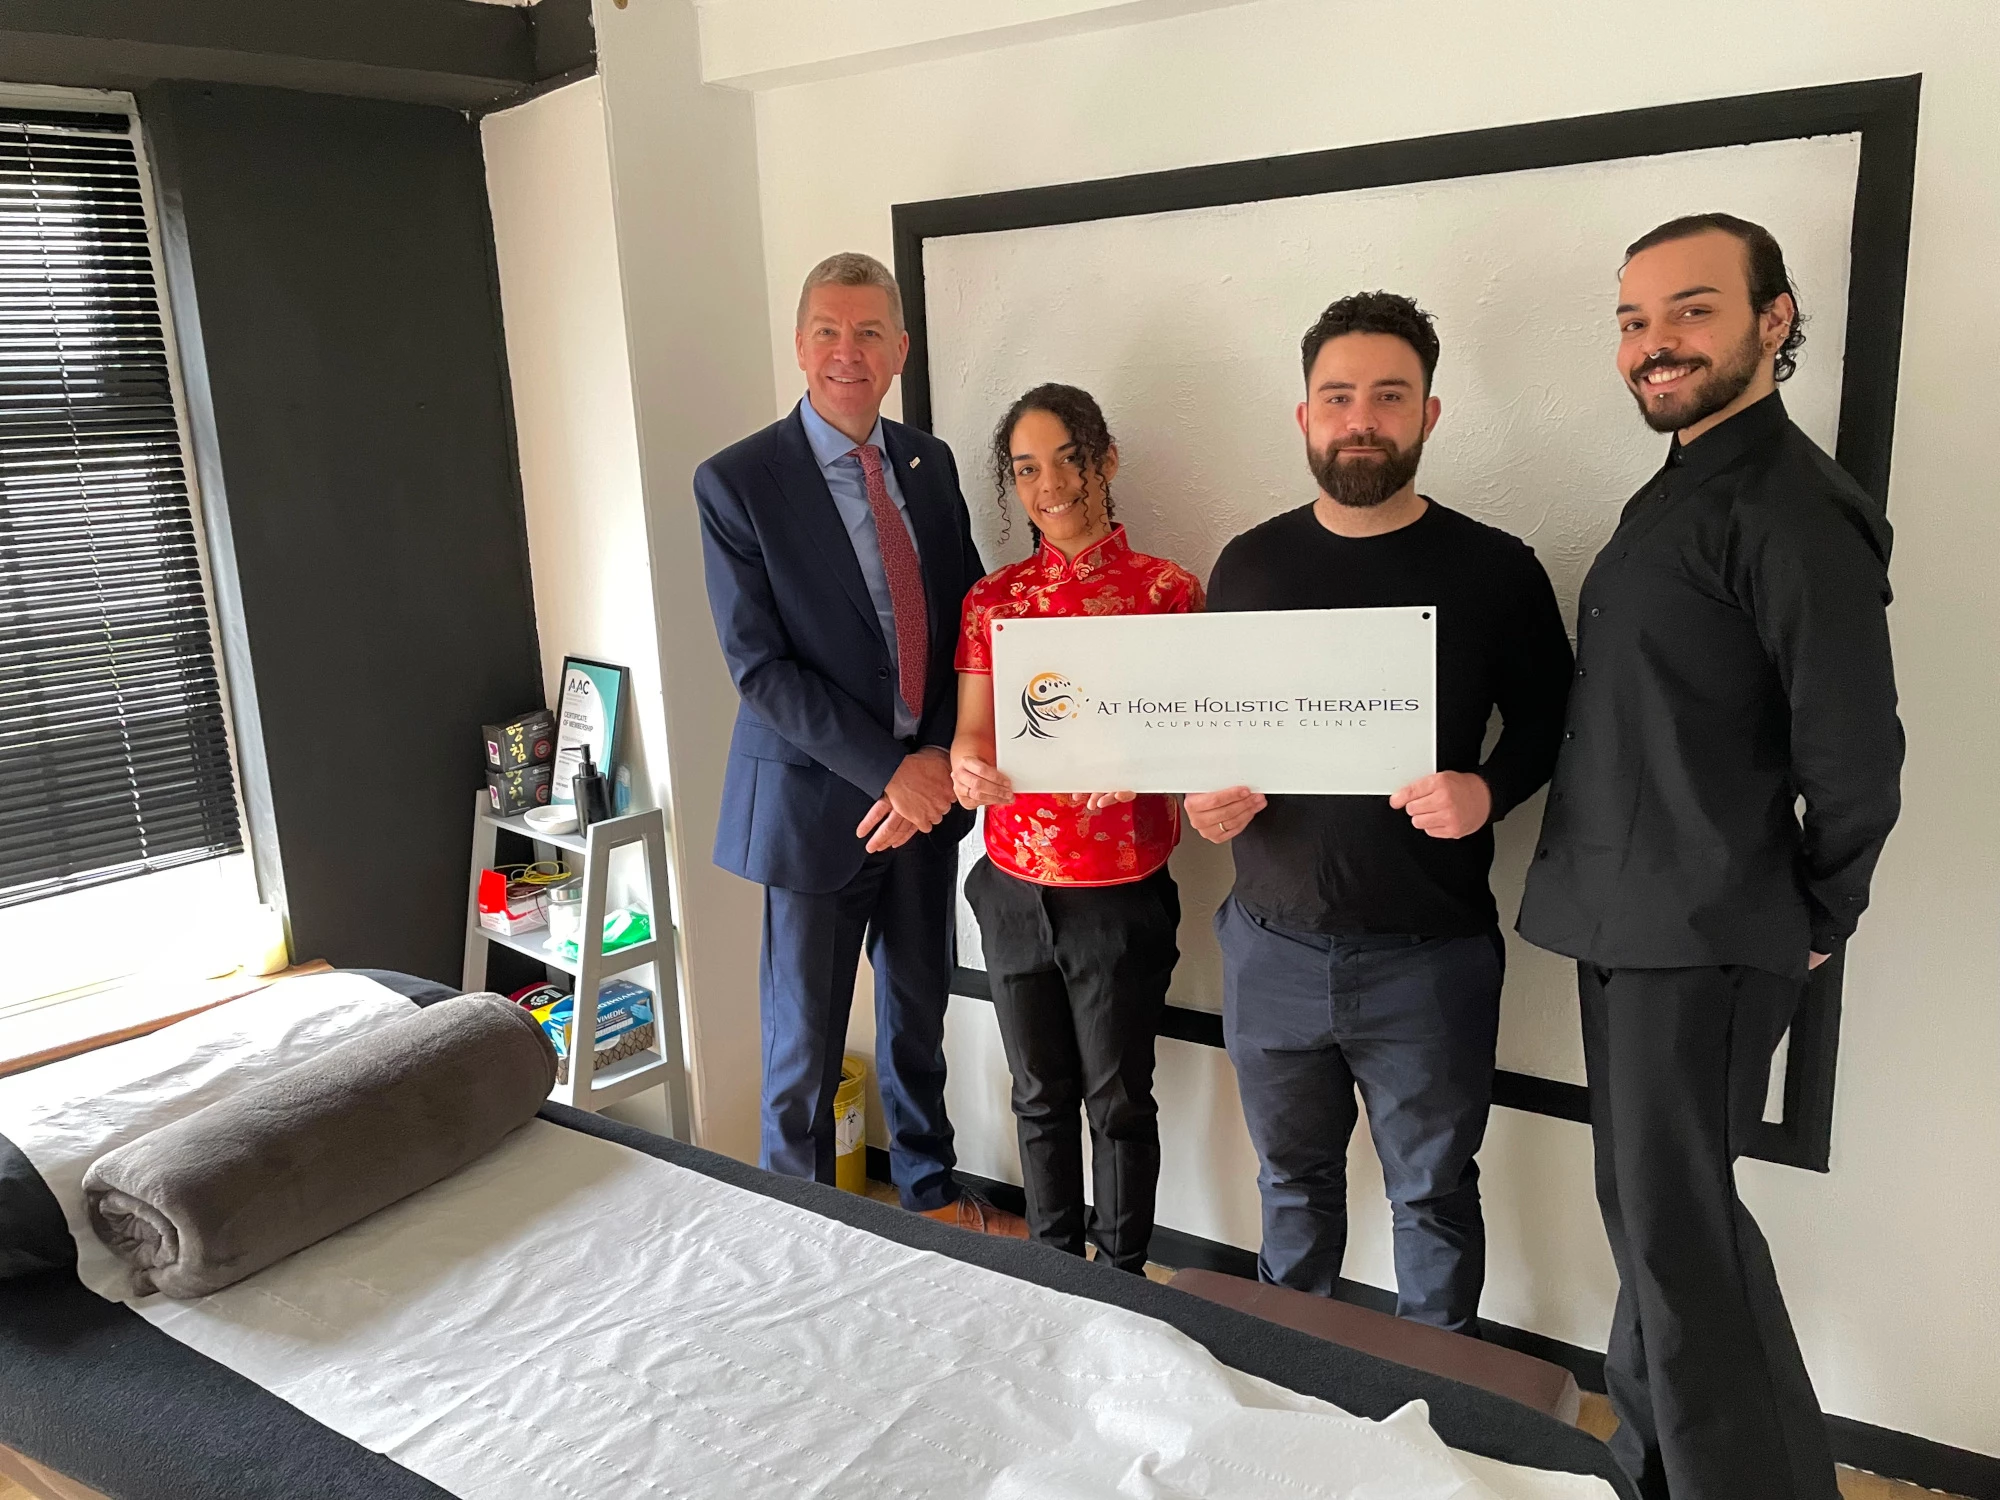 L-R Walsall Business Support Board Member Rob Colbourne, Aze Pires, Hugo Cabeceiras and Antonio Pires from At Home Holistics 